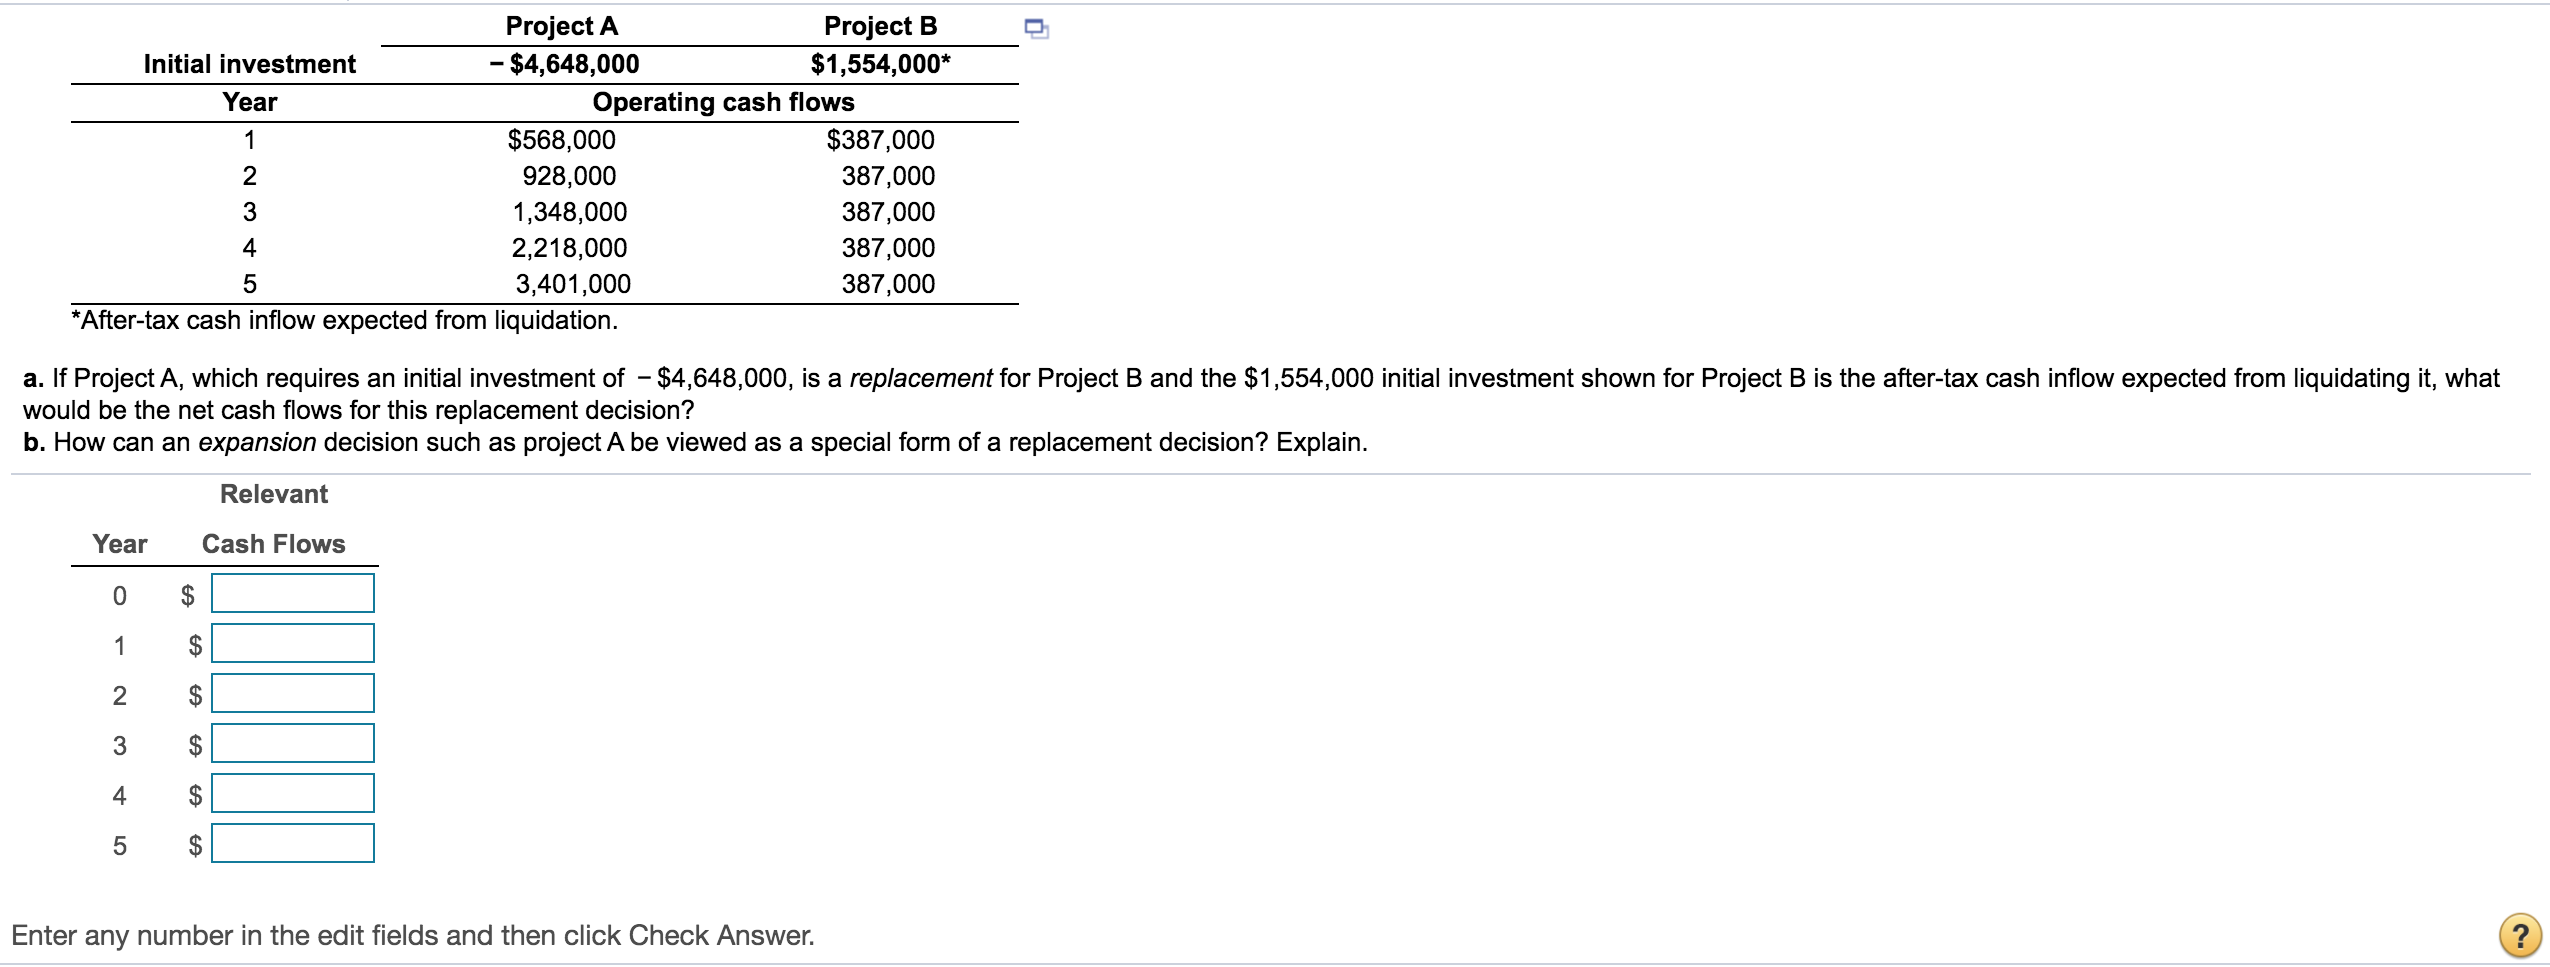 a. If Project A, which requires an initial investment of - $4,648,000, is a replacement for Project B and the $1,554,000 initial investment shown for Project B is the after-tax cash inflow expected from liquidating it, what
would be the net cash flows for this replacement decision?
b. How can an expansion decision such as project A be viewed as a special form of a replacement decision? Explain.
